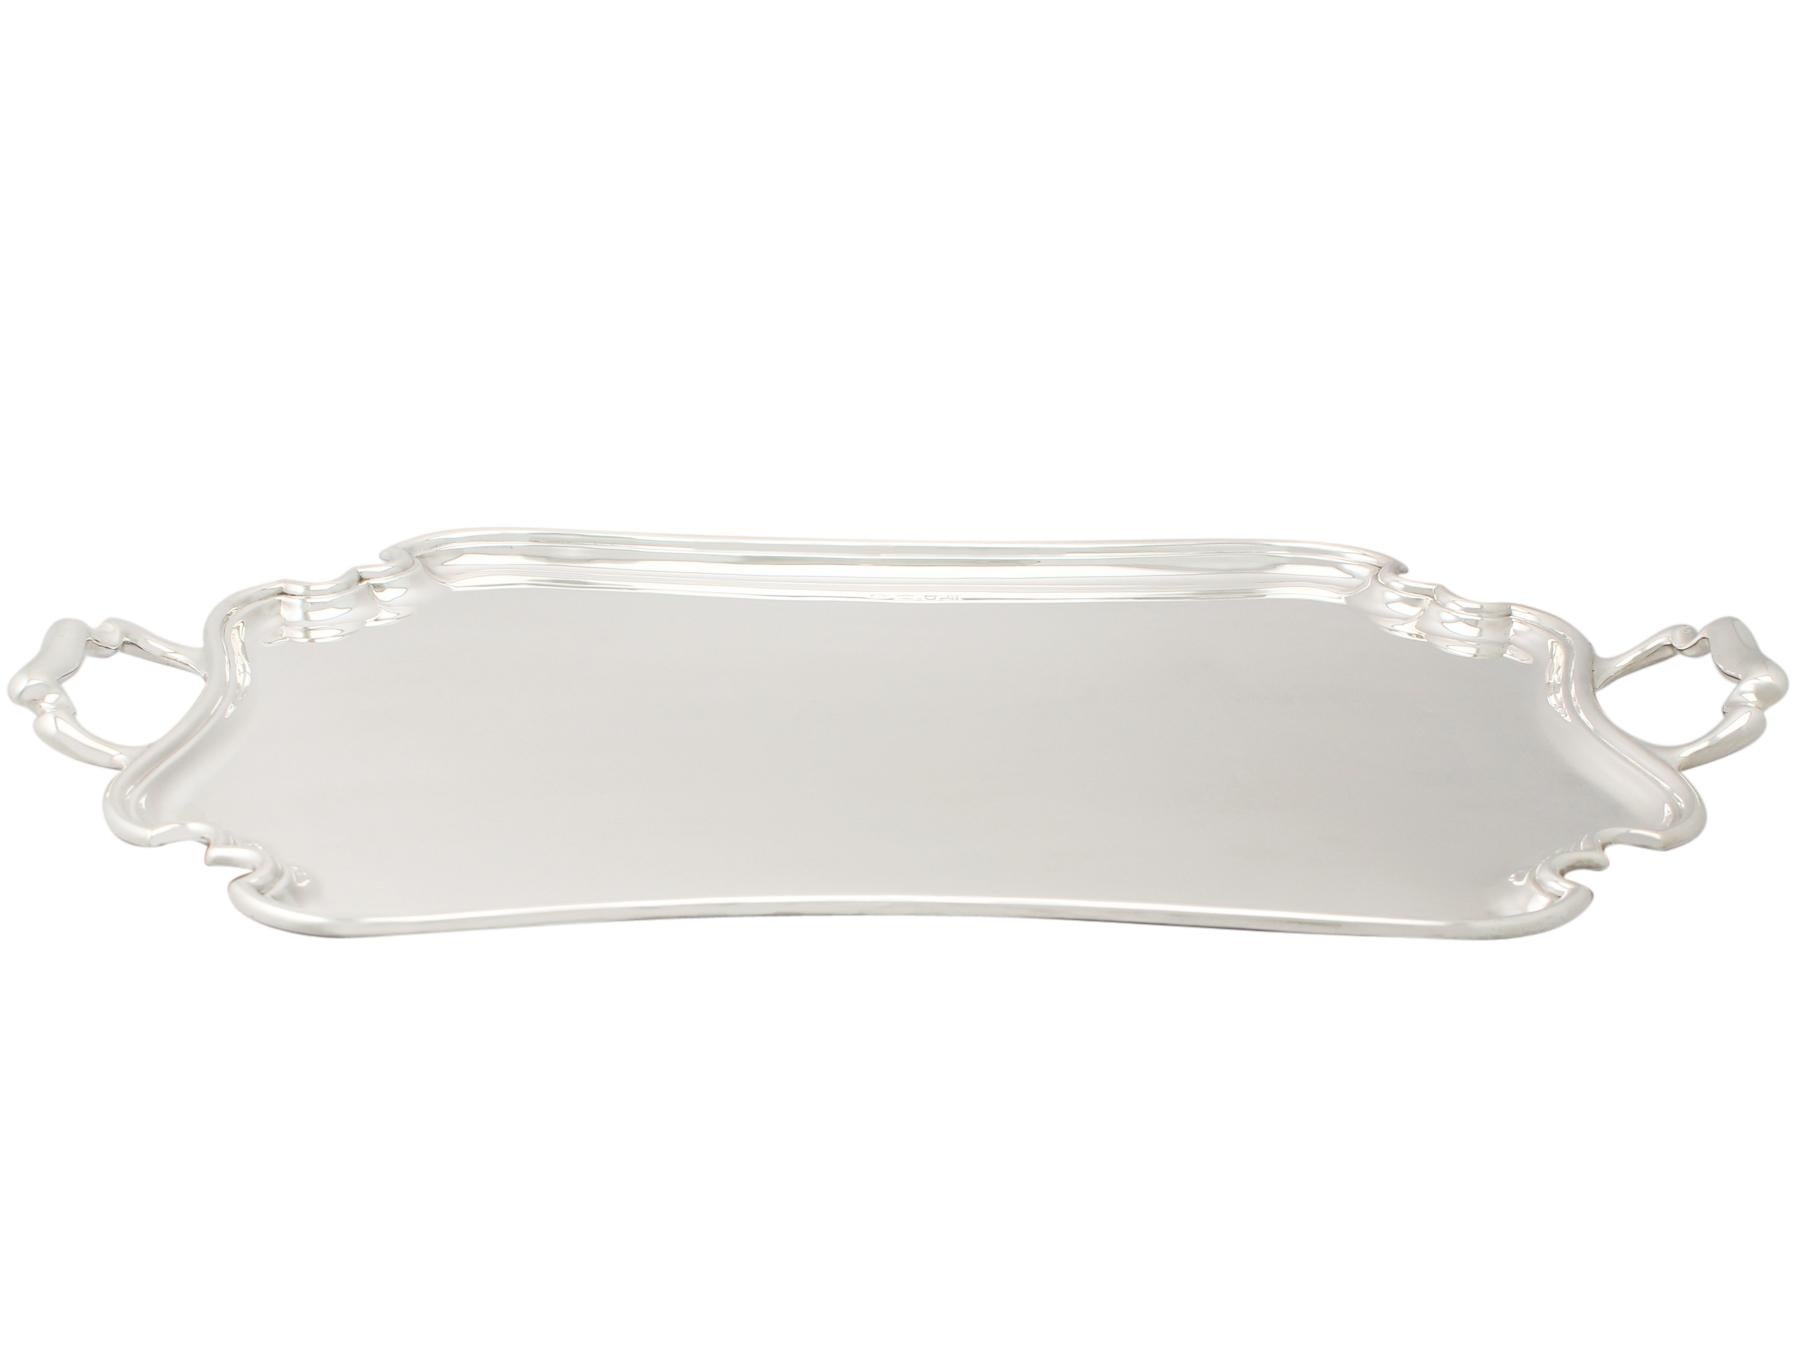 An exceptional, fine and impressive antique George V English sterling silver two-handled tea tray; part of our silverware collection.

This exceptional antique George V sterling silver tray has a rectangular shaped form with incurved